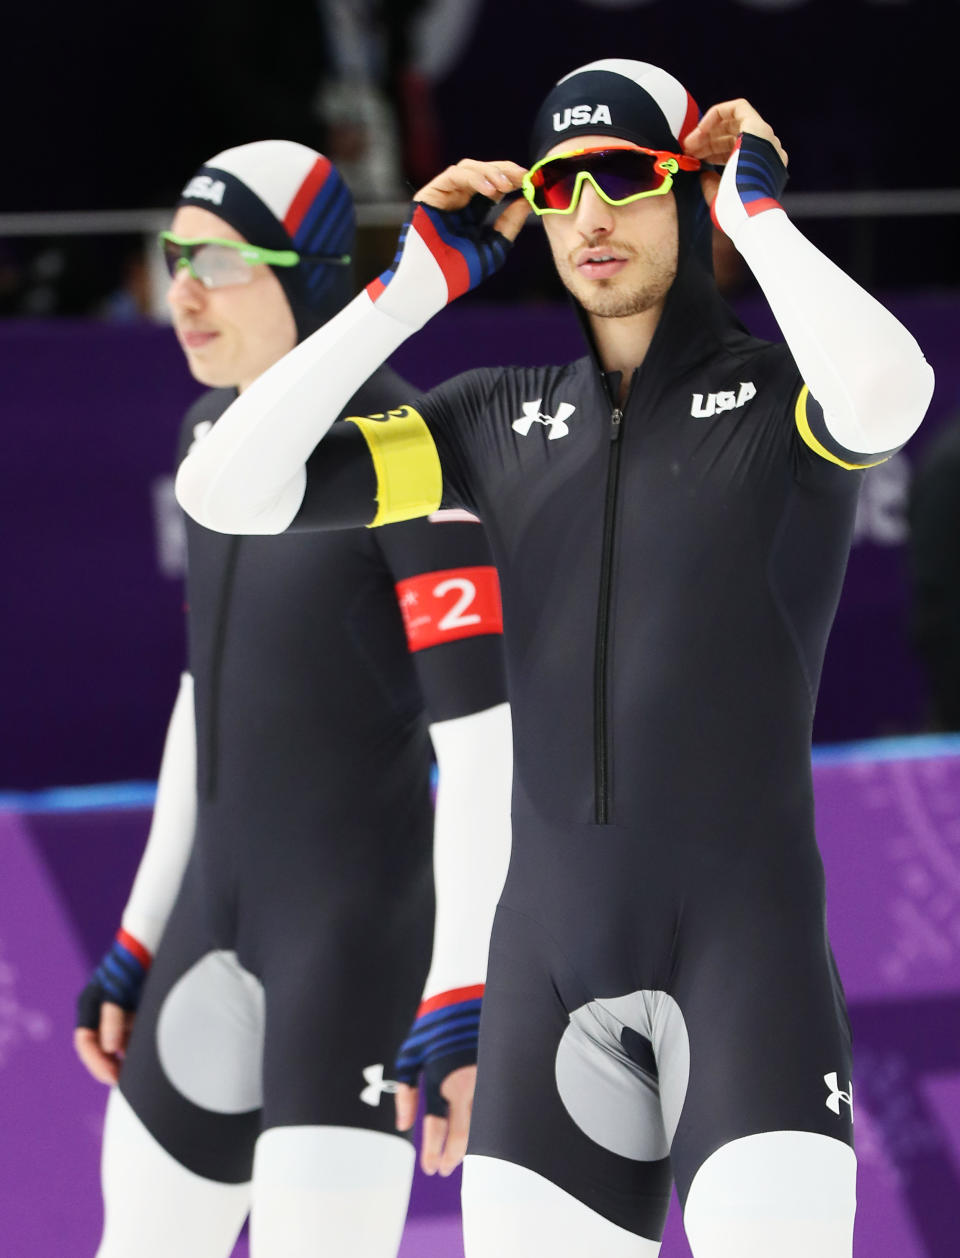 <p>Emery Lehman and Jonathan Garcia of the United States warm up prior to the Men’s Team Pursuit Speed Skating Quarter Finals on day nine of the PyeongChang 2018 Winter Olympic Games at Gangneung Oval on February 18, 2018 in Gangneung, South Korea. (Photo by Jamie Squire/Getty Images) </p>